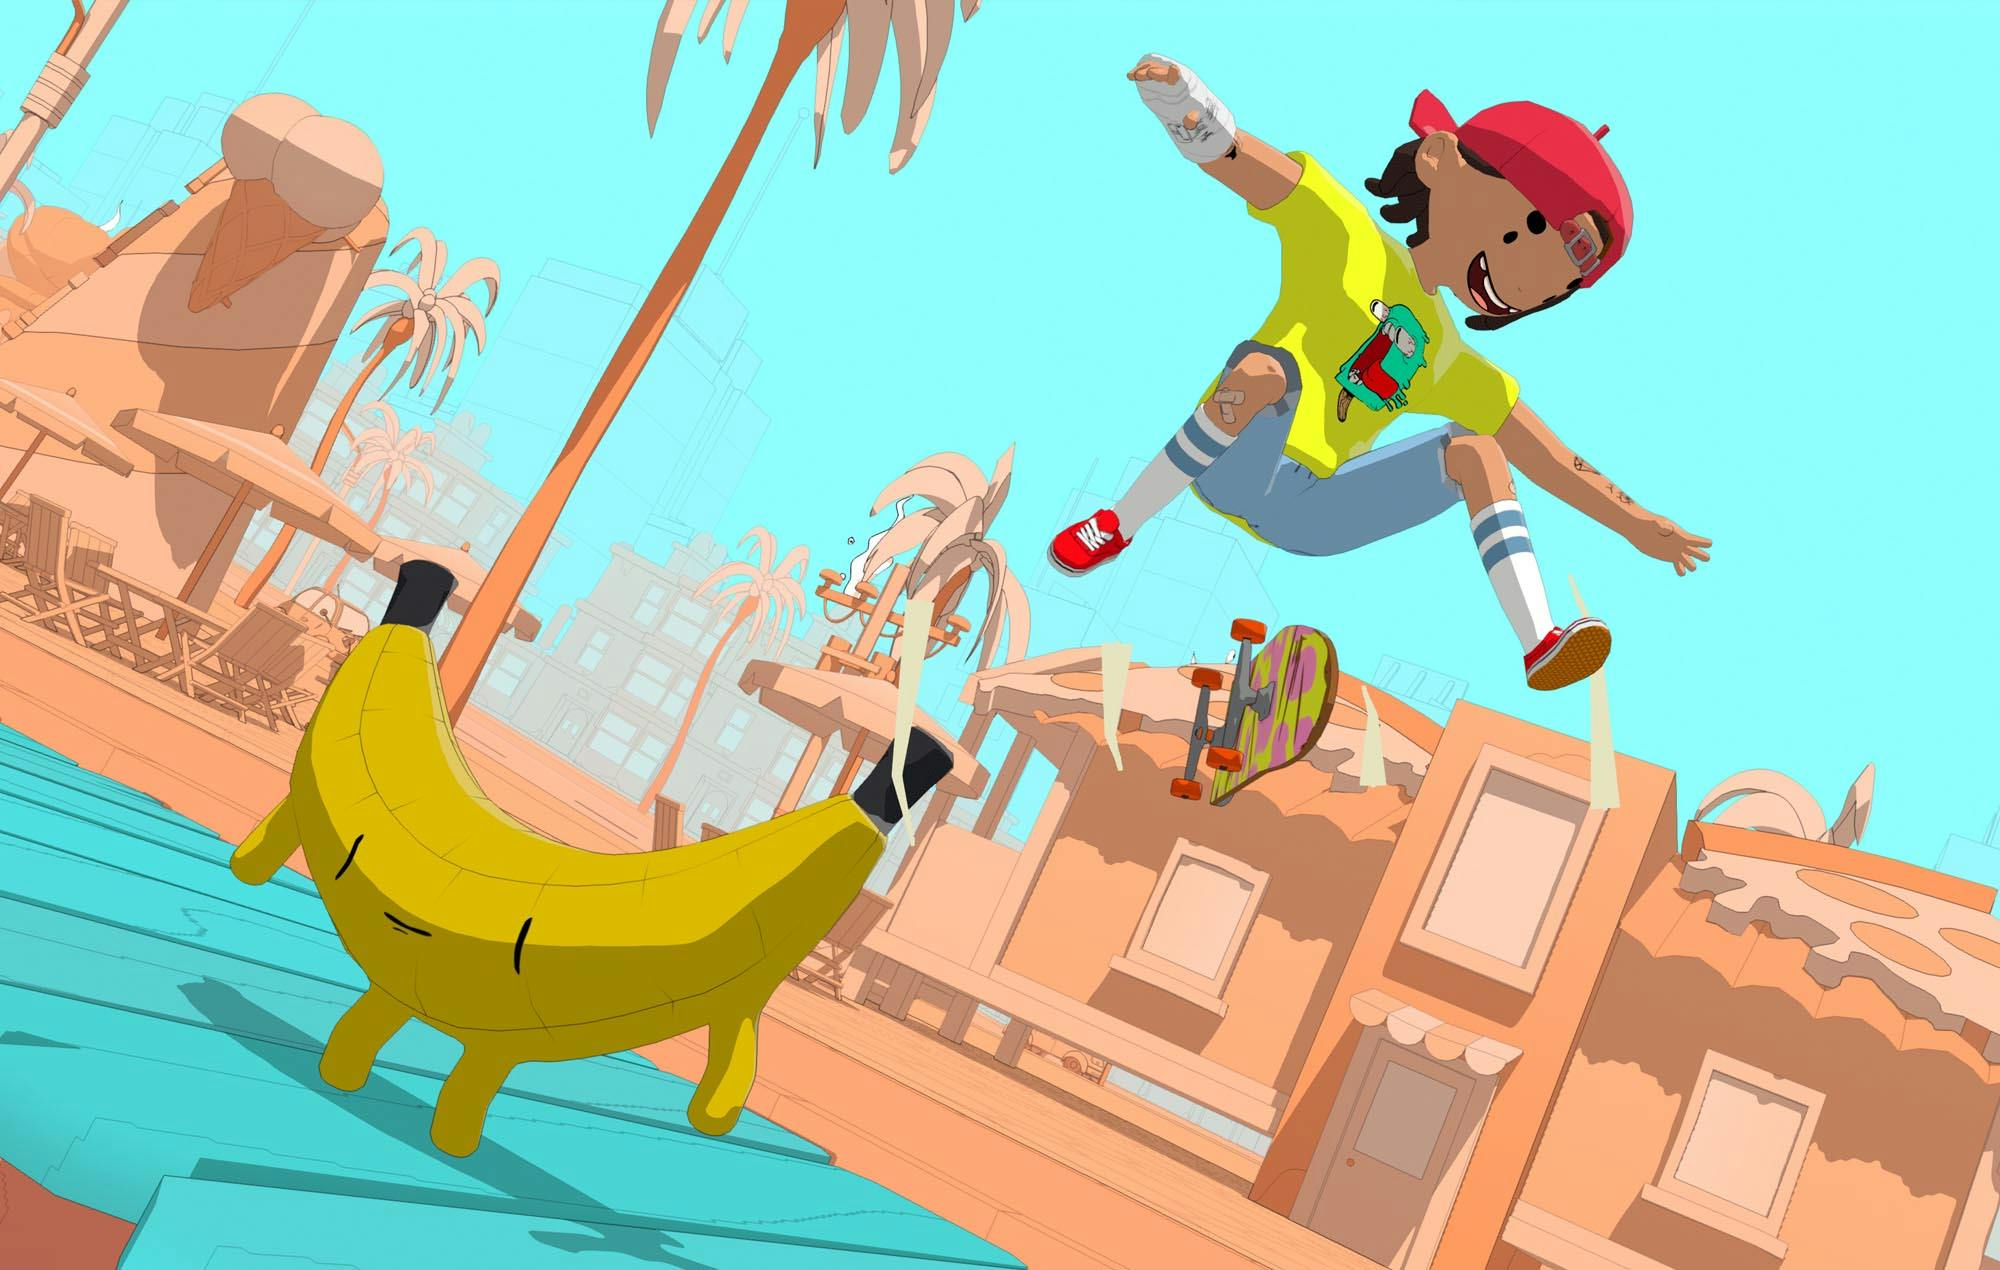 OlliOlli World key art. The player character does a kickflio over a large banana on a boardwalk.